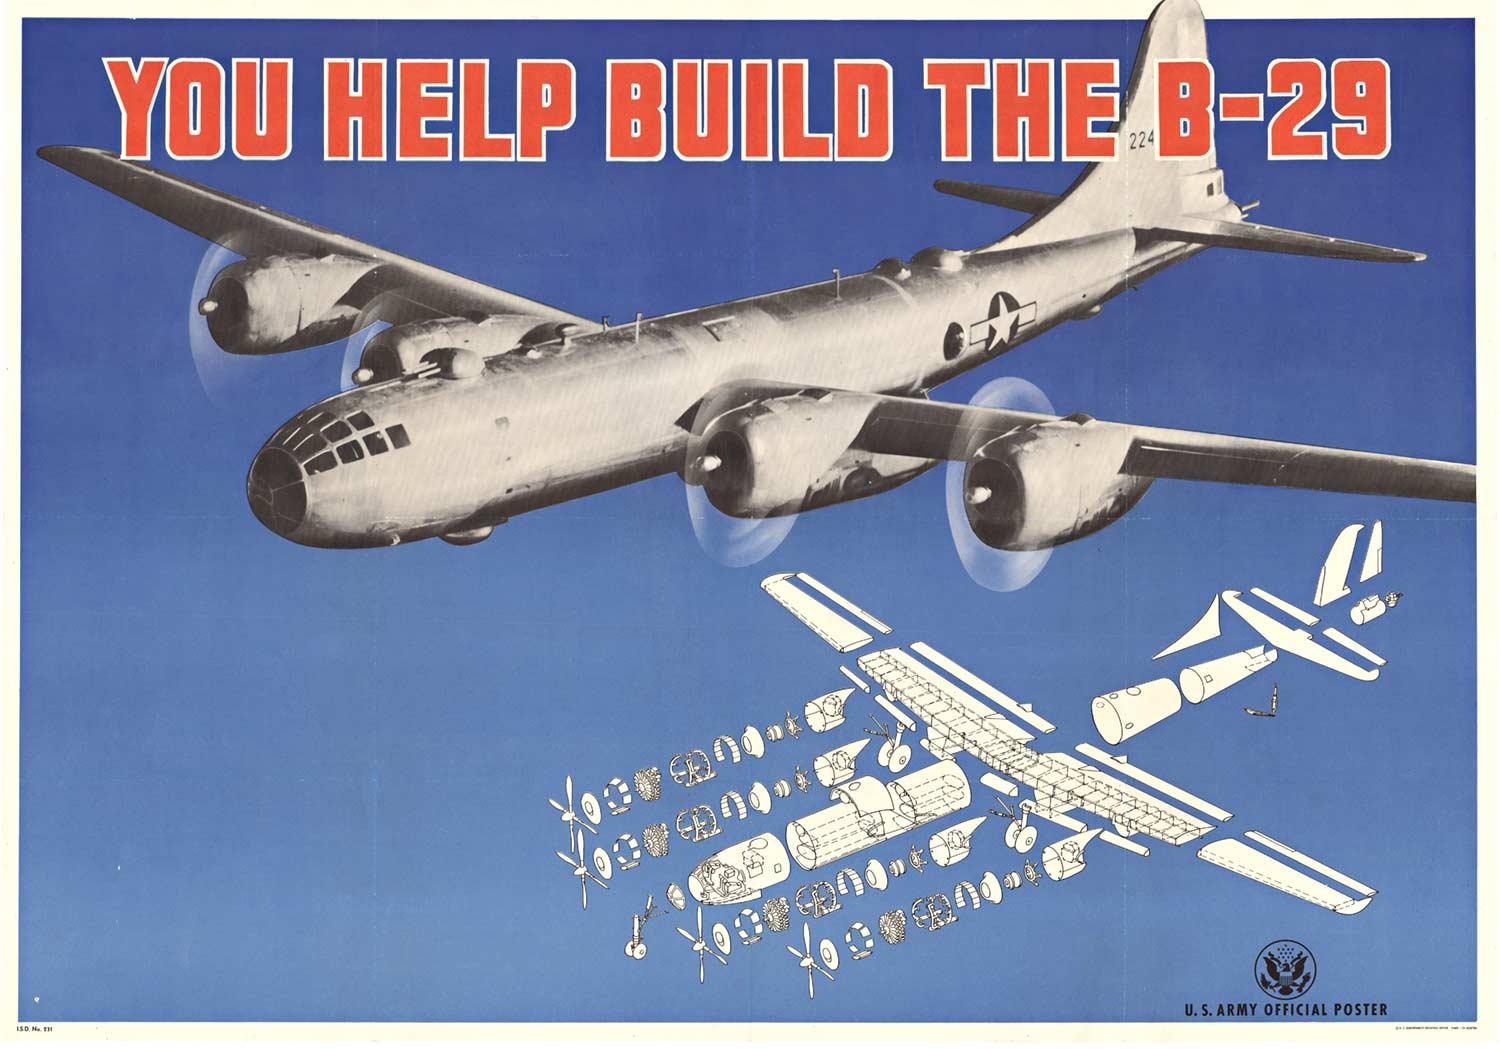 Unknown Print - Original "You Help Build The B-29 (bomber)" vintage poster